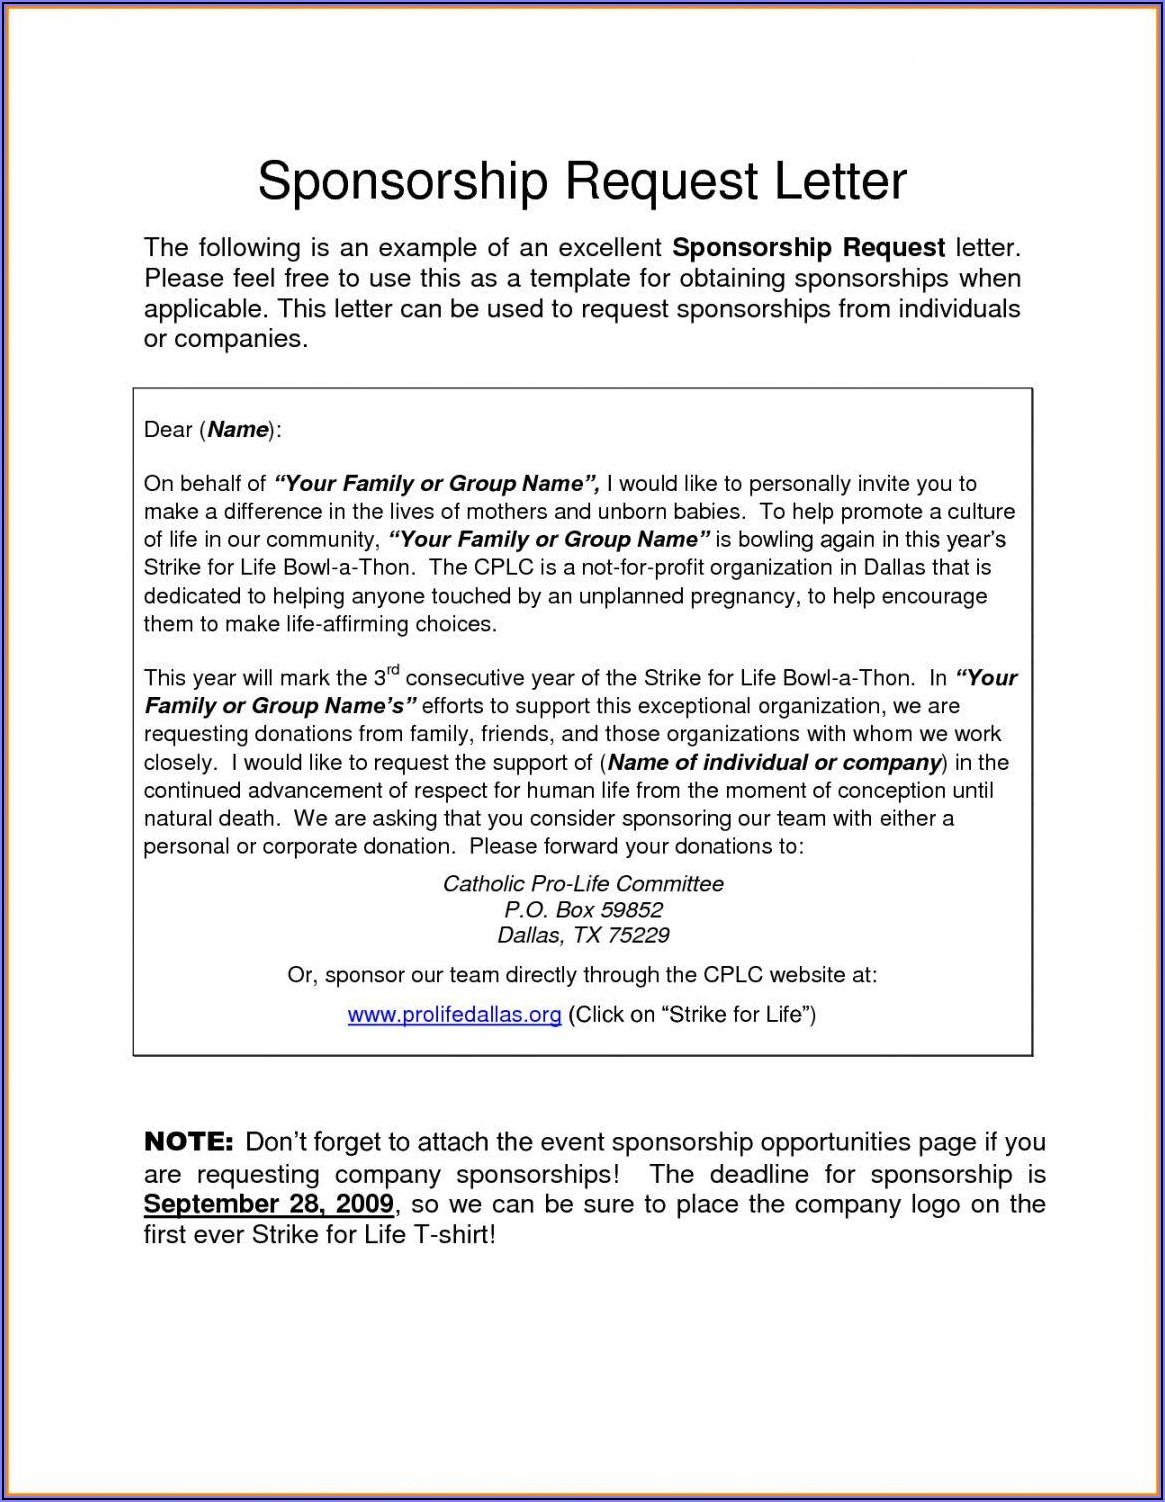 Sample Sponsorship Request Letter For Charity Event